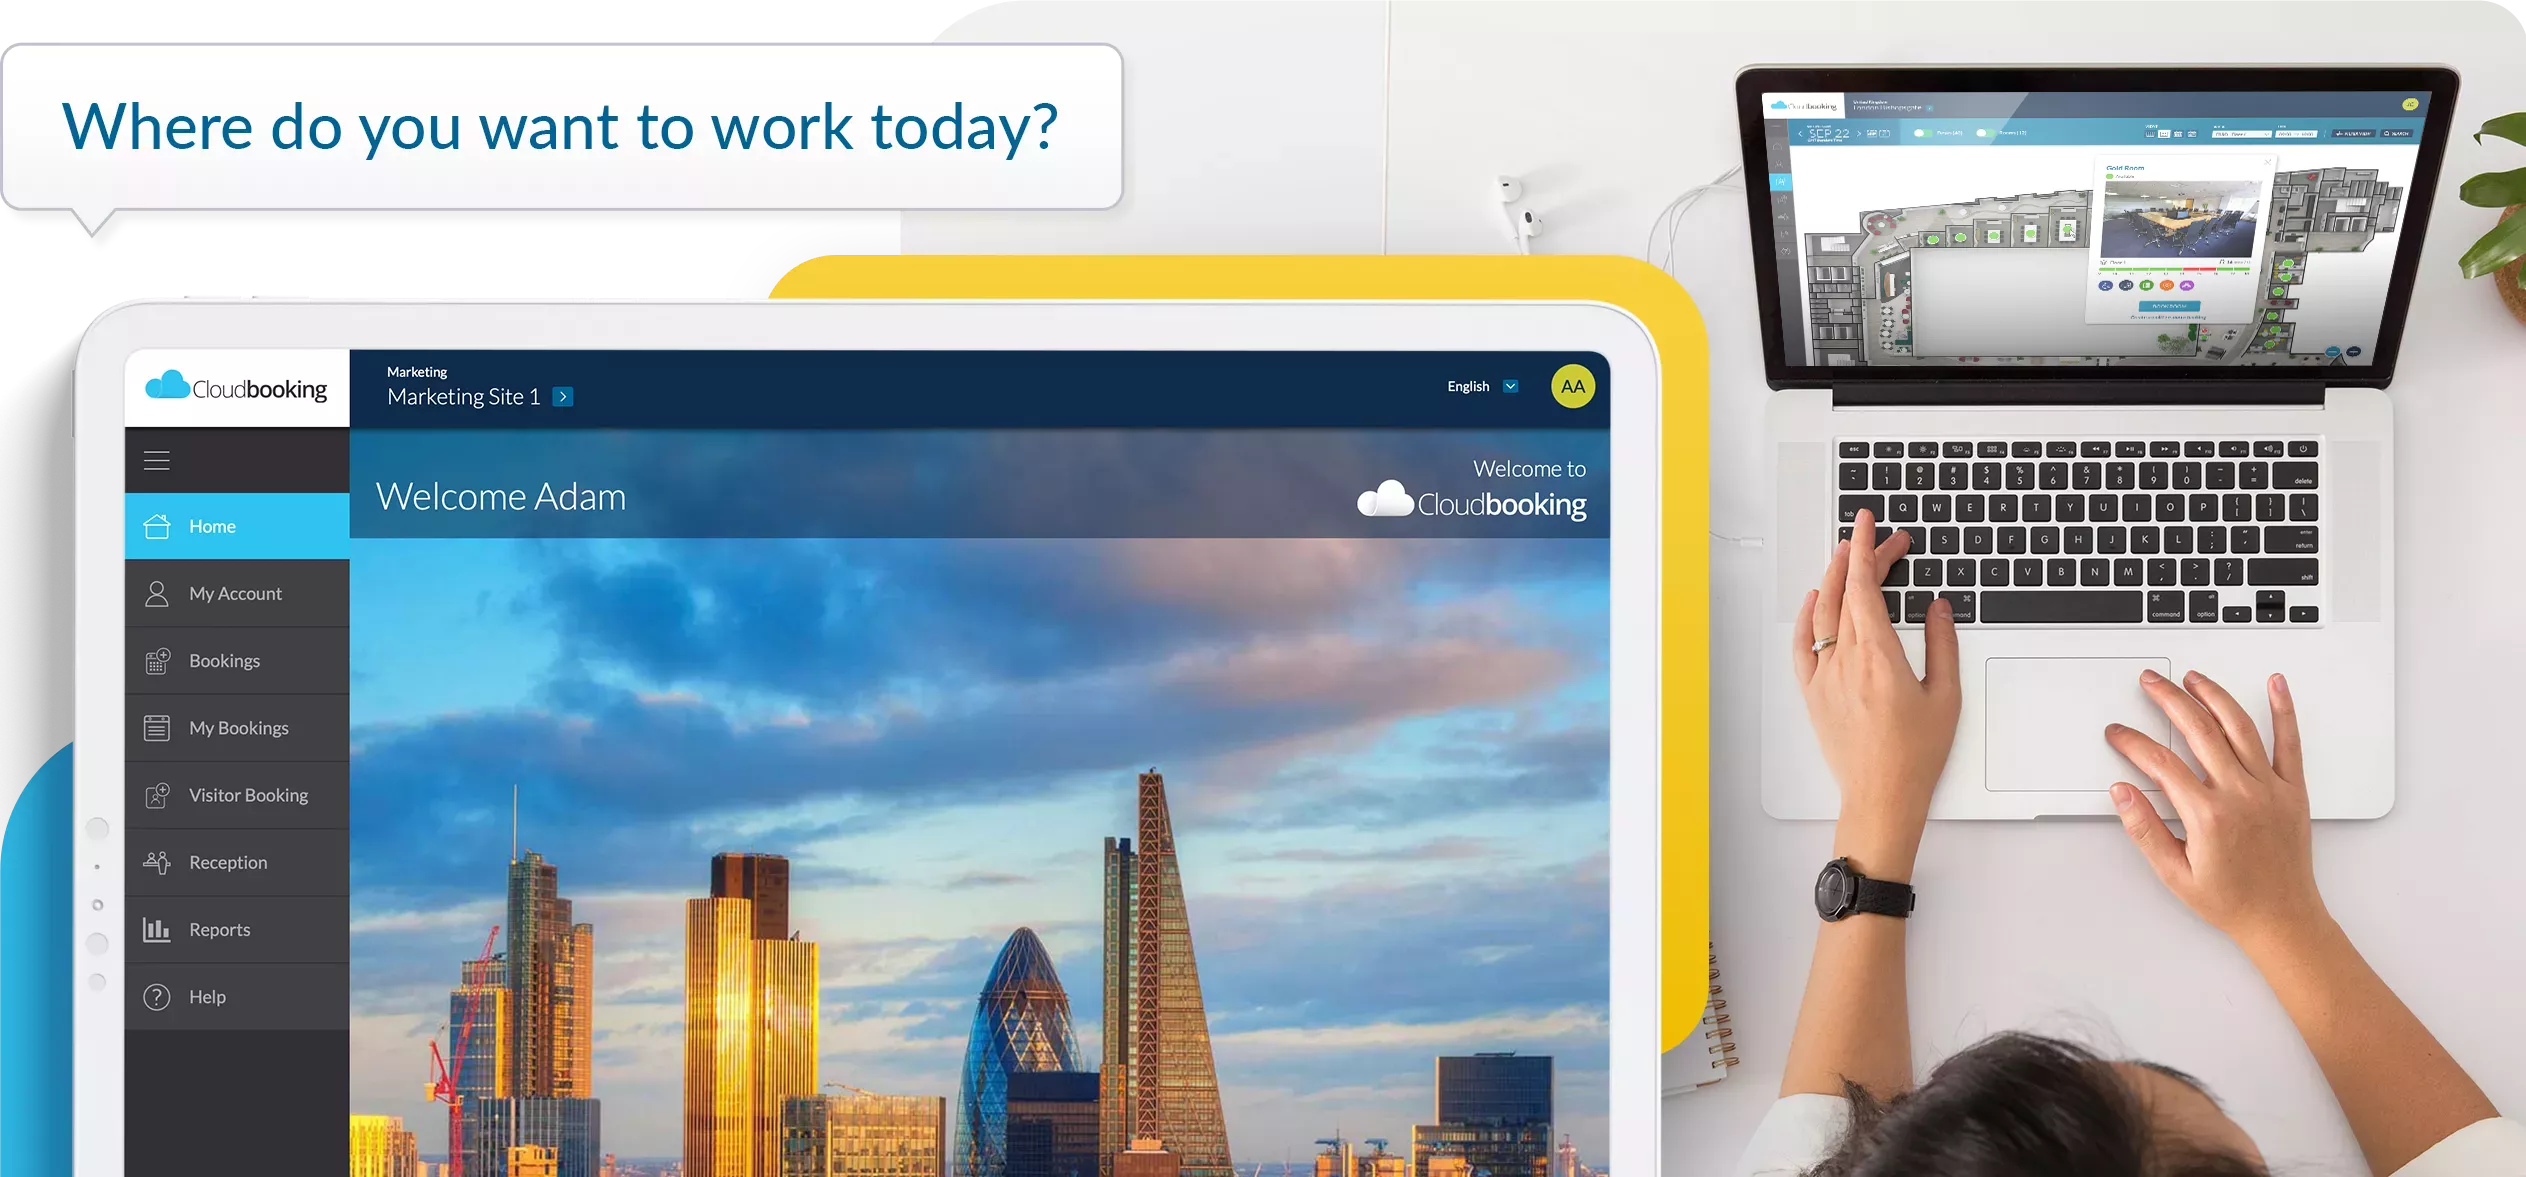 Where do you want to work today? Cloudbooking hybrid work software.